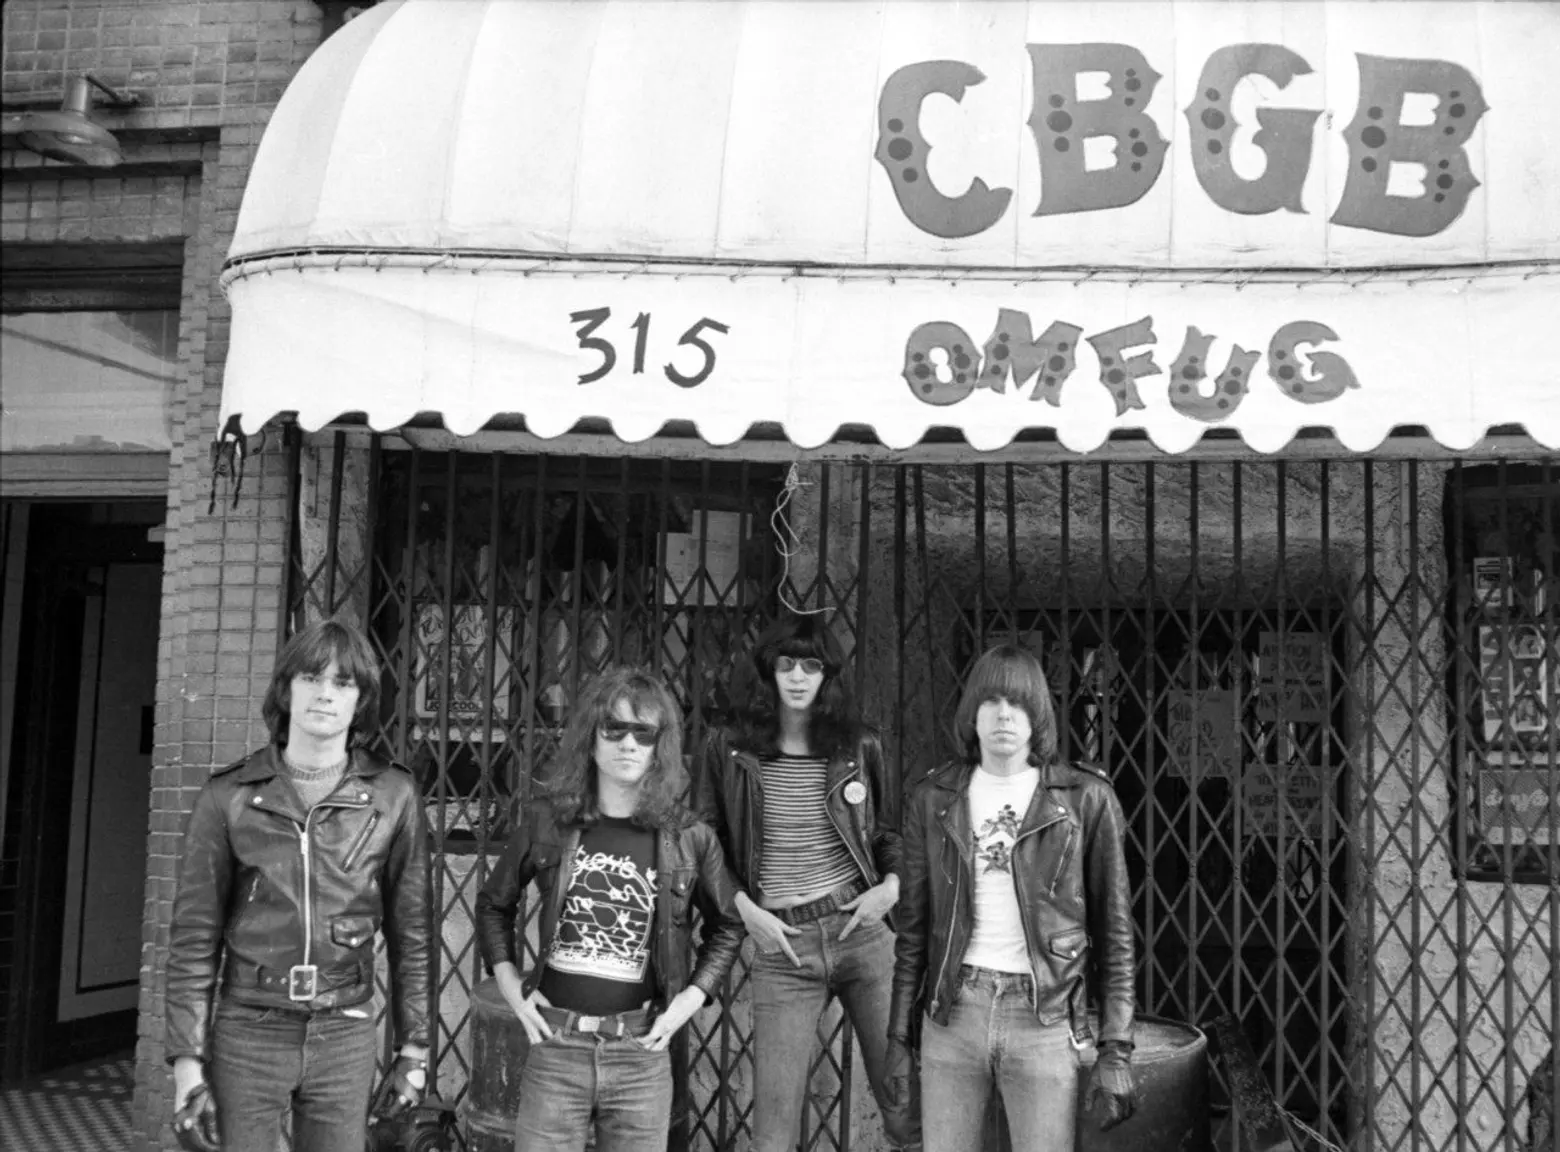 On this day in 1974, the Ramones played their first gig at CBGB in the East Village